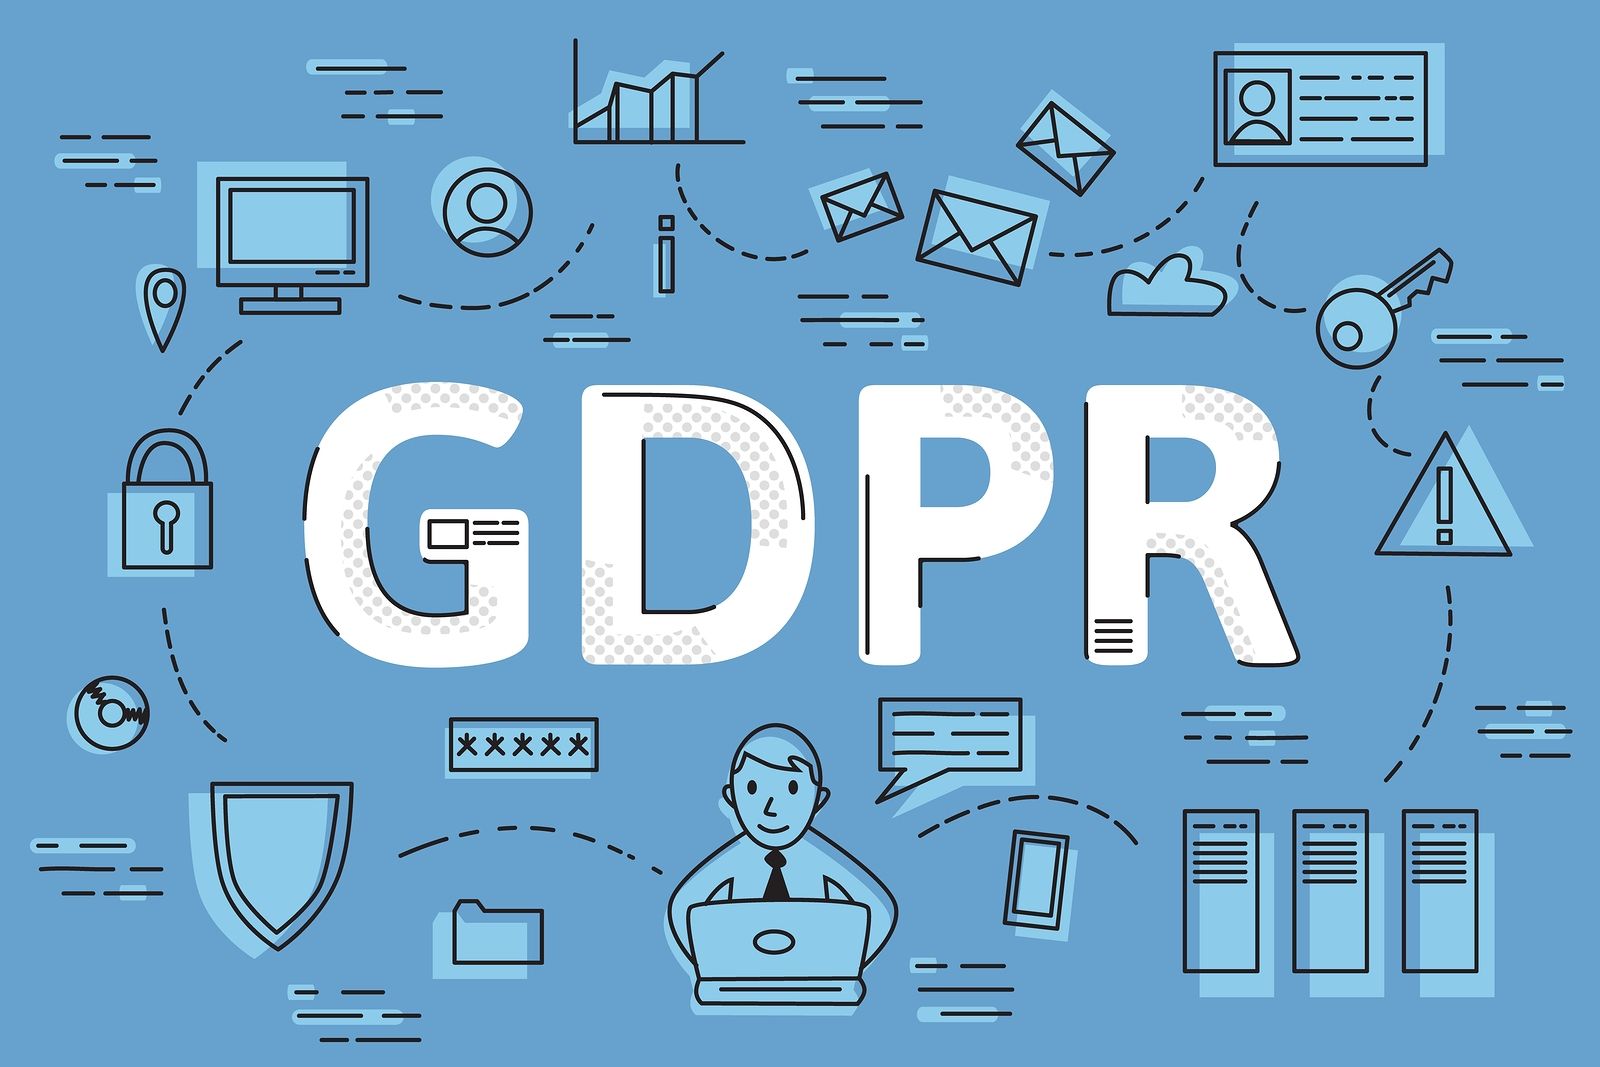 GDPR: What Is It and Why Should You Care?